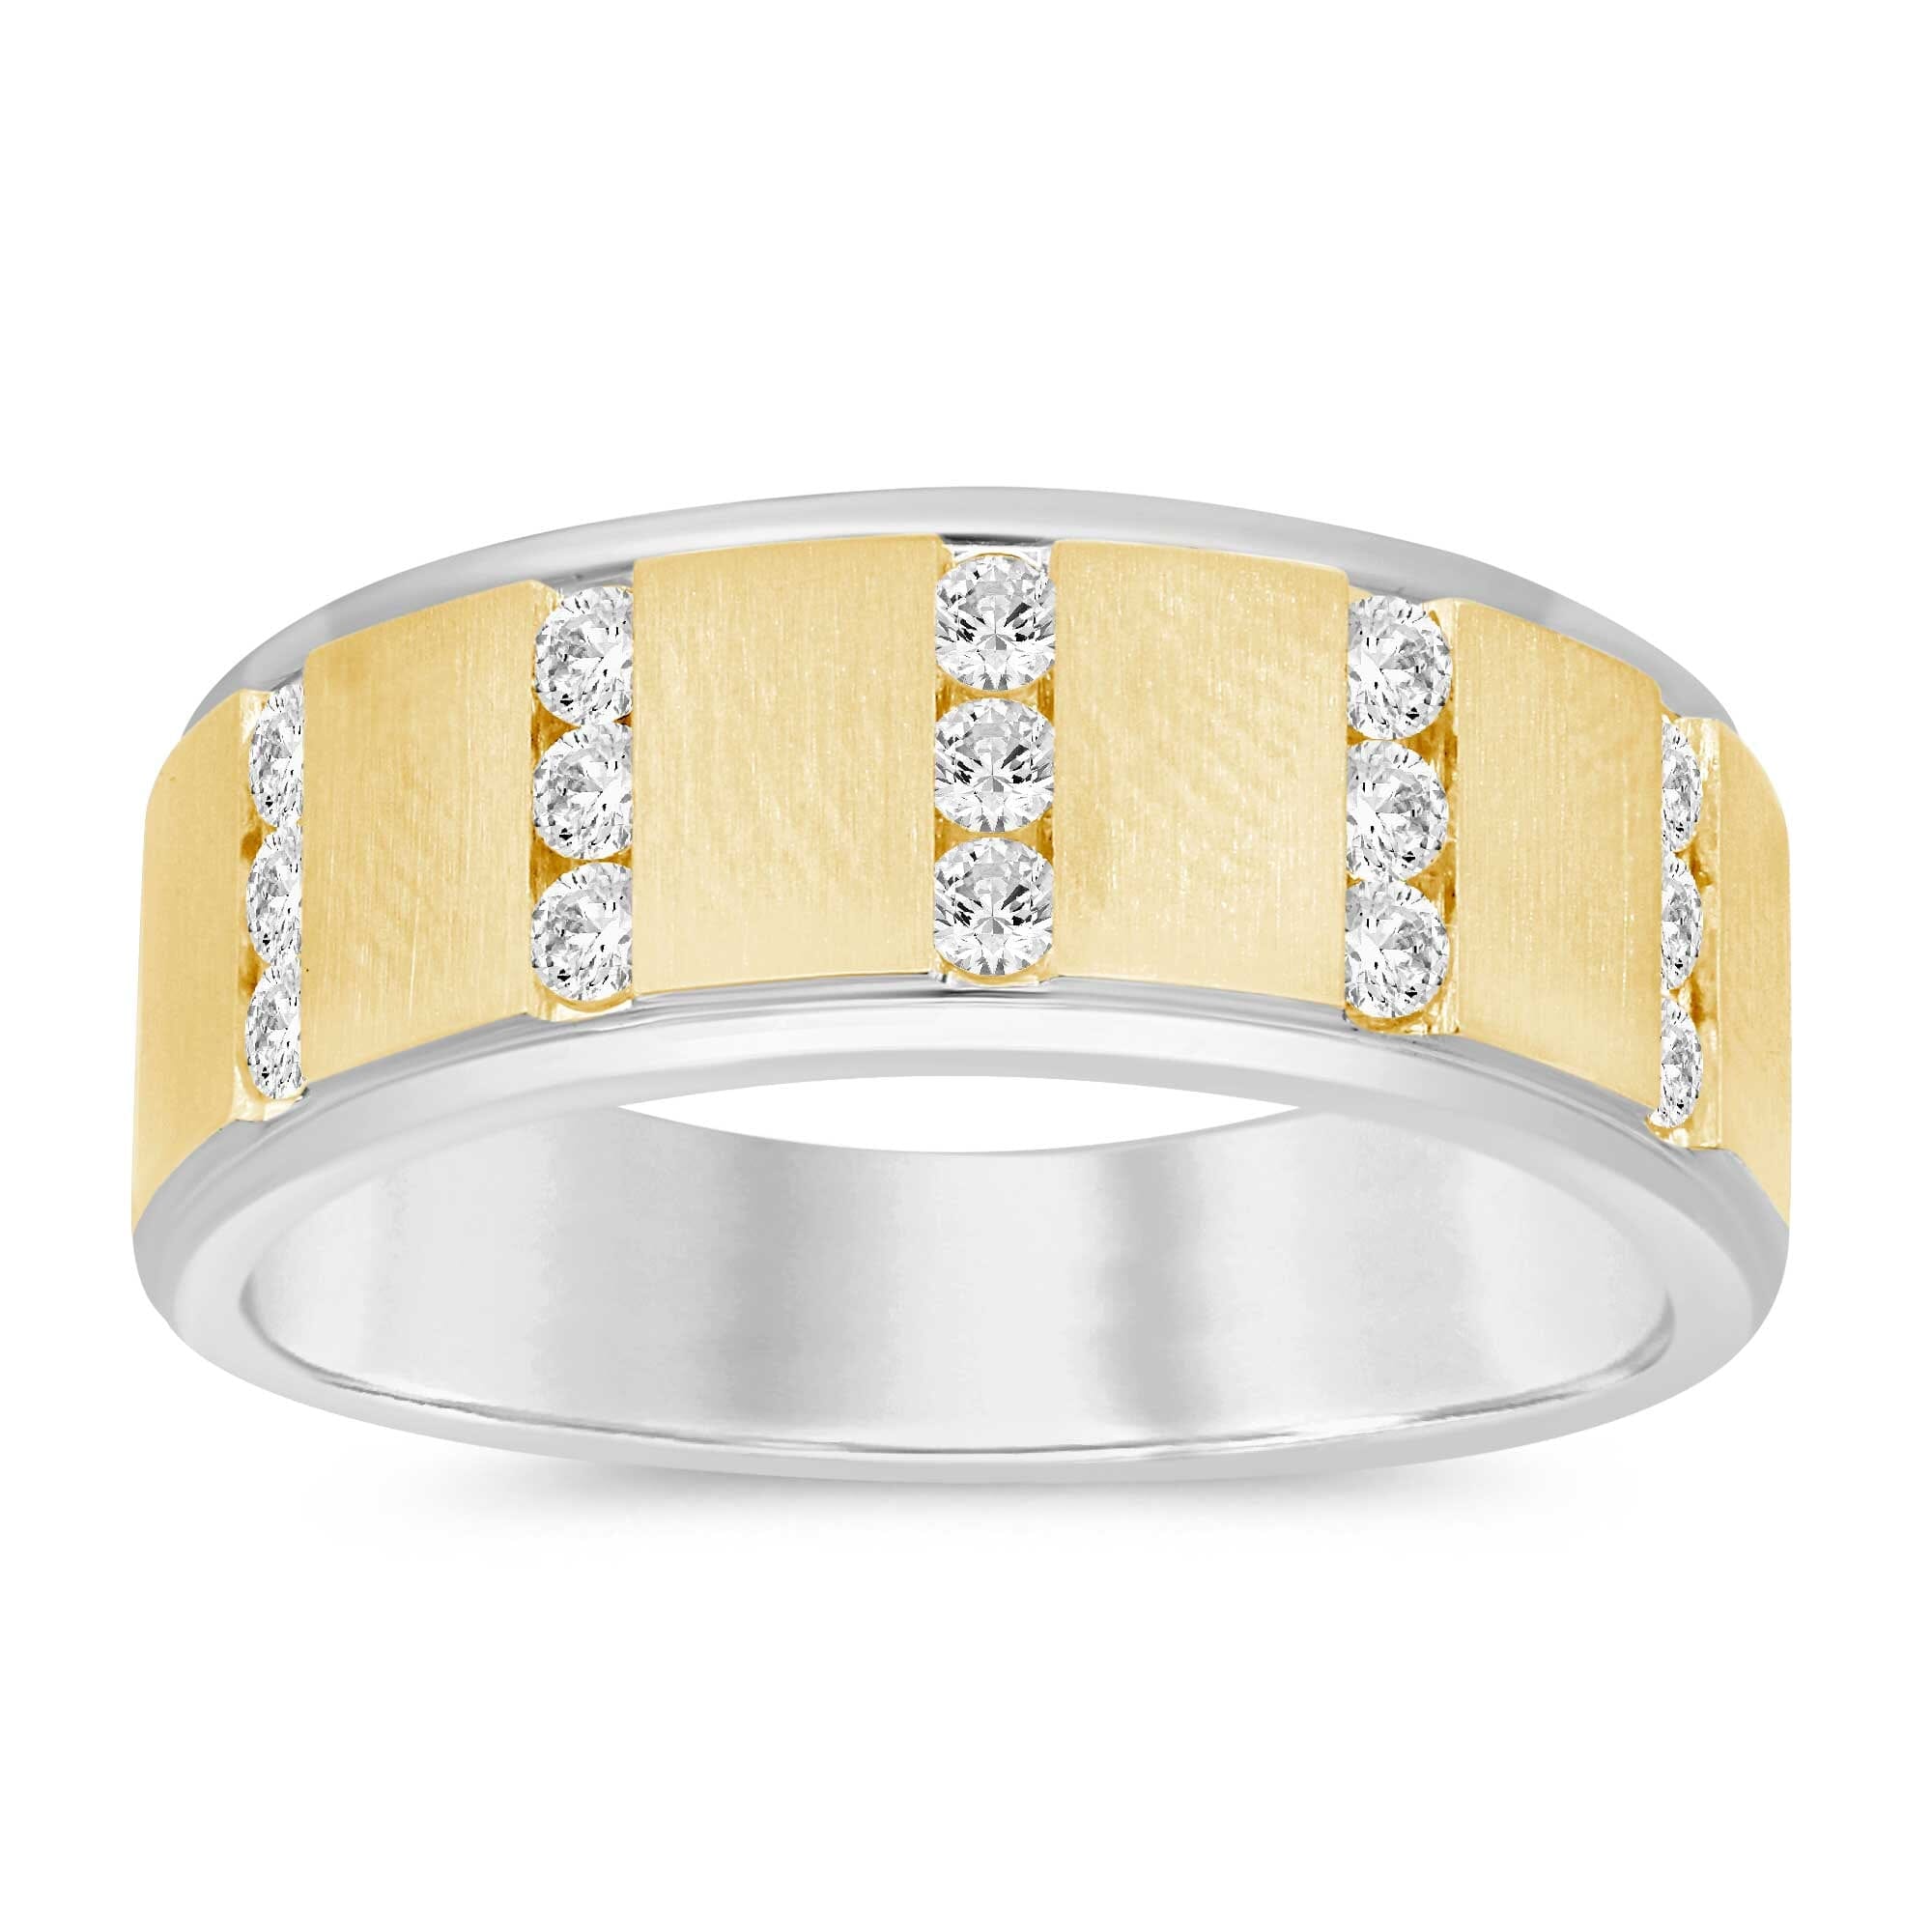 Meera Multi Row Ring with 1/2ct of Laboratory Grown Diamonds in 9ct Yellow Gold and 9ct White Gold Rings Bevilles 